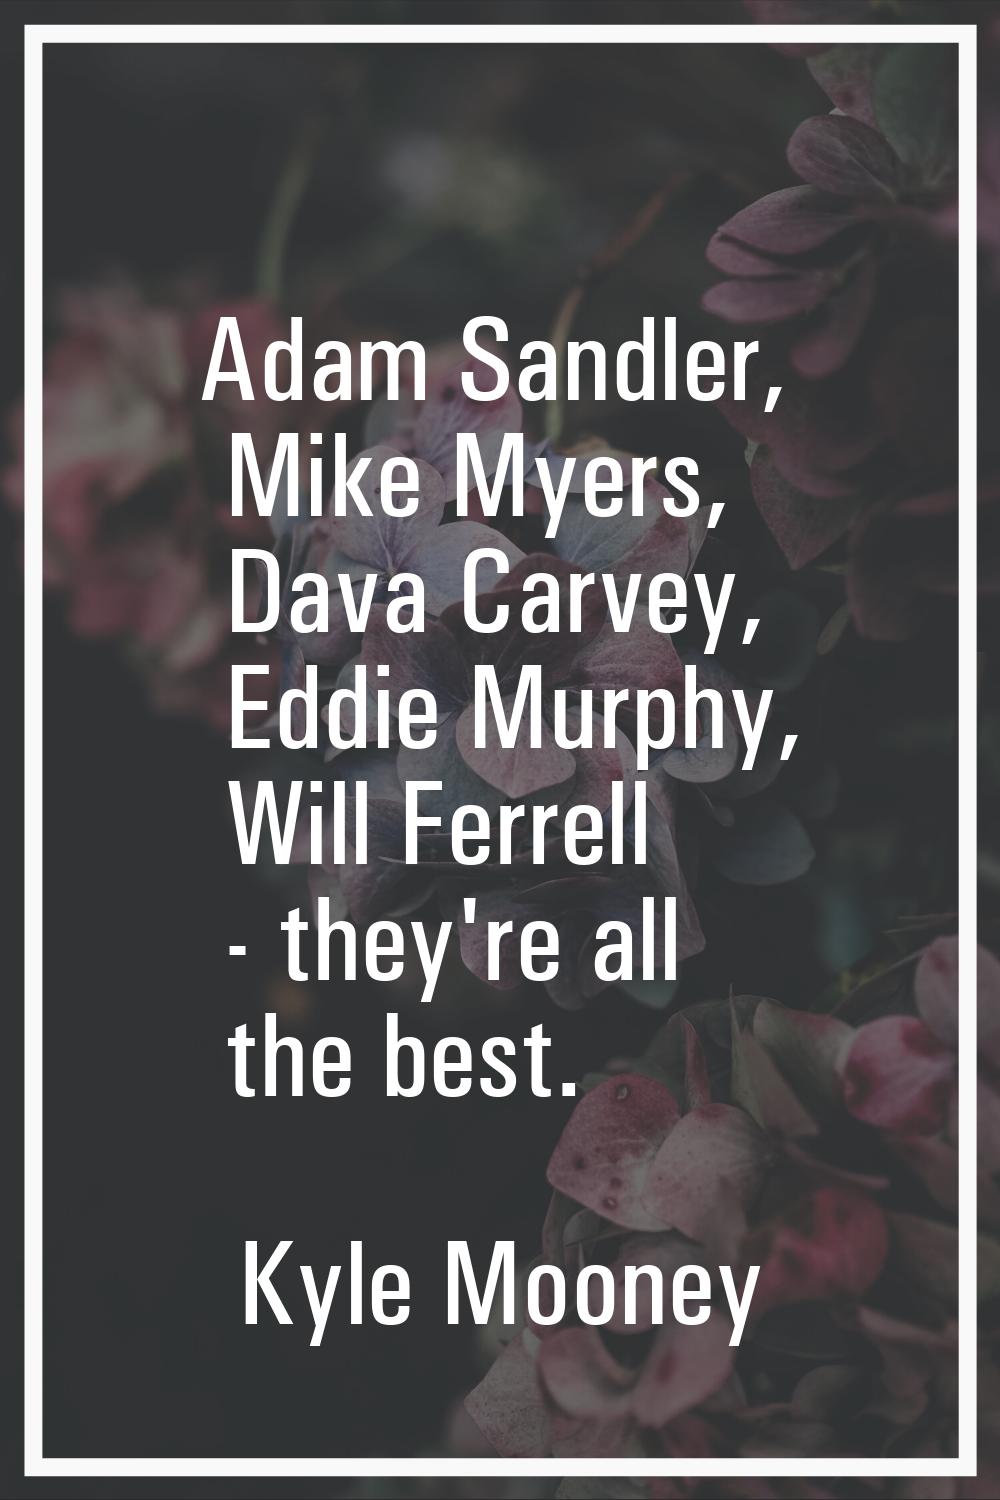 Adam Sandler, Mike Myers, Dava Carvey, Eddie Murphy, Will Ferrell - they're all the best.